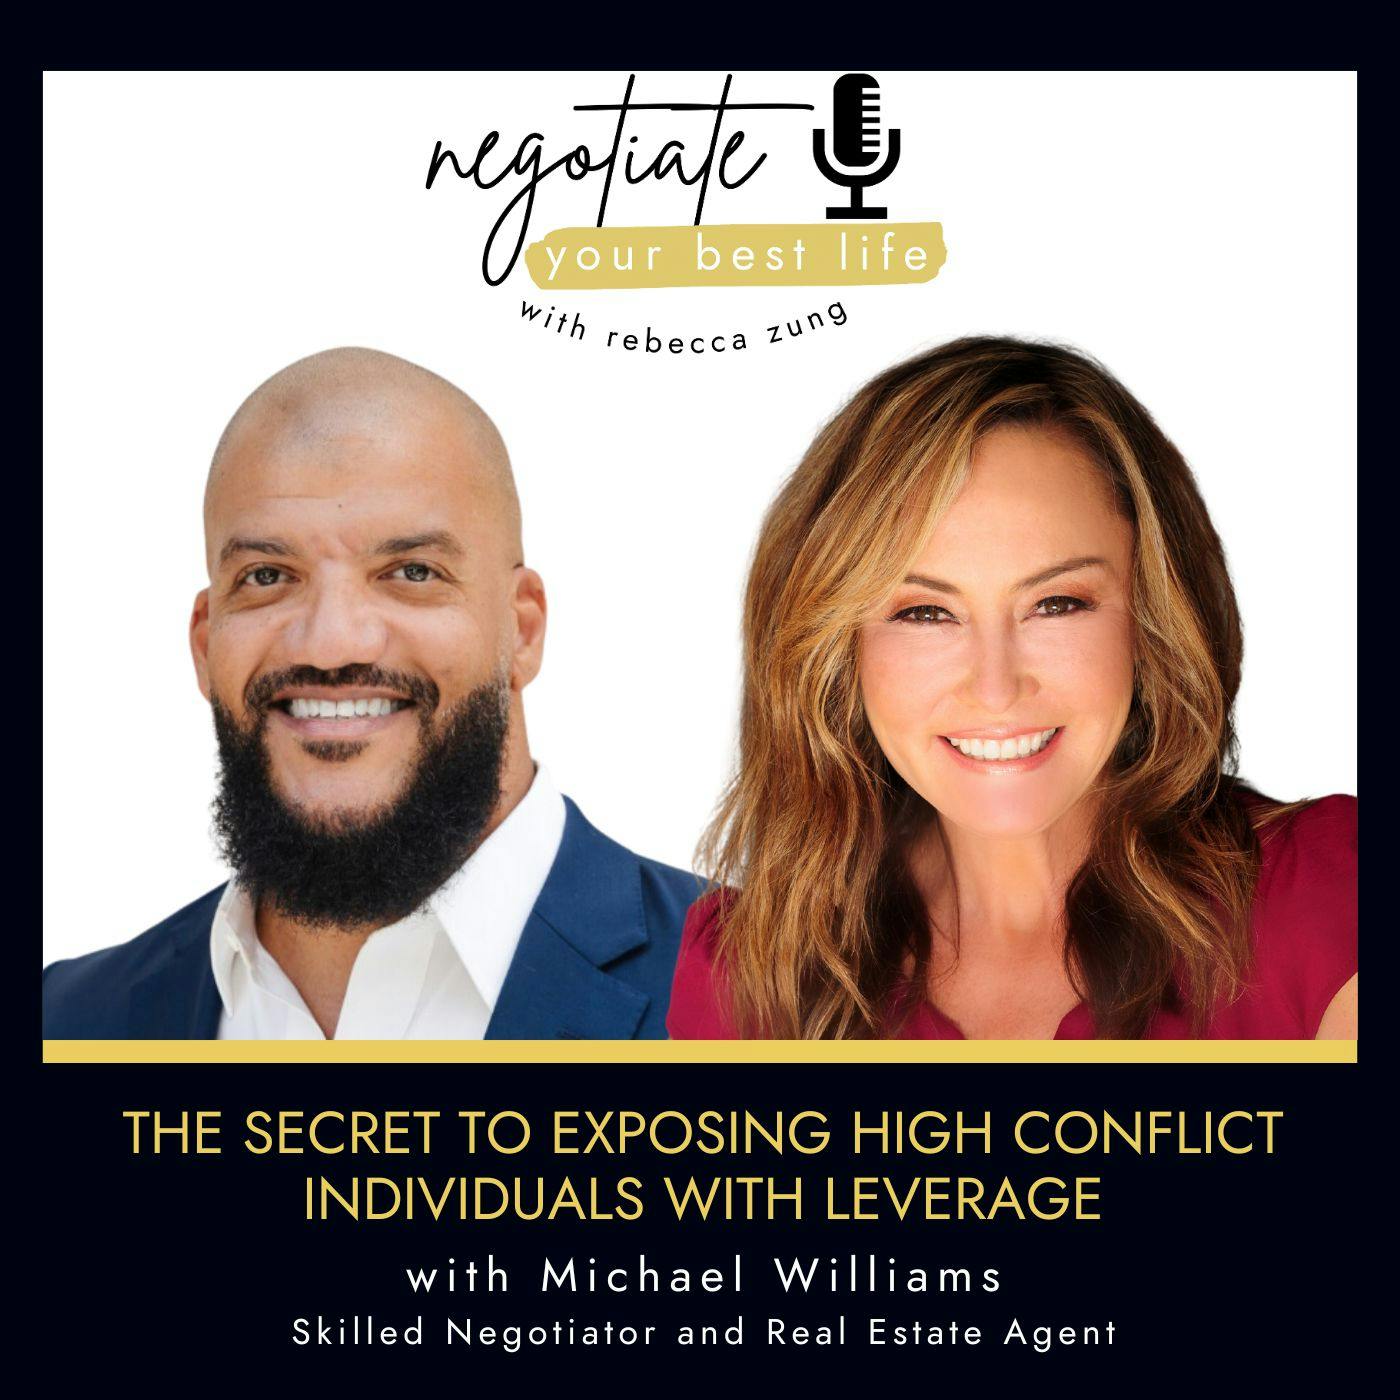 The Secret to Exposing High Conflict Individuals with Leverage with Michael Williams and Rebecca Zung on Negotiate Your Best Life #503